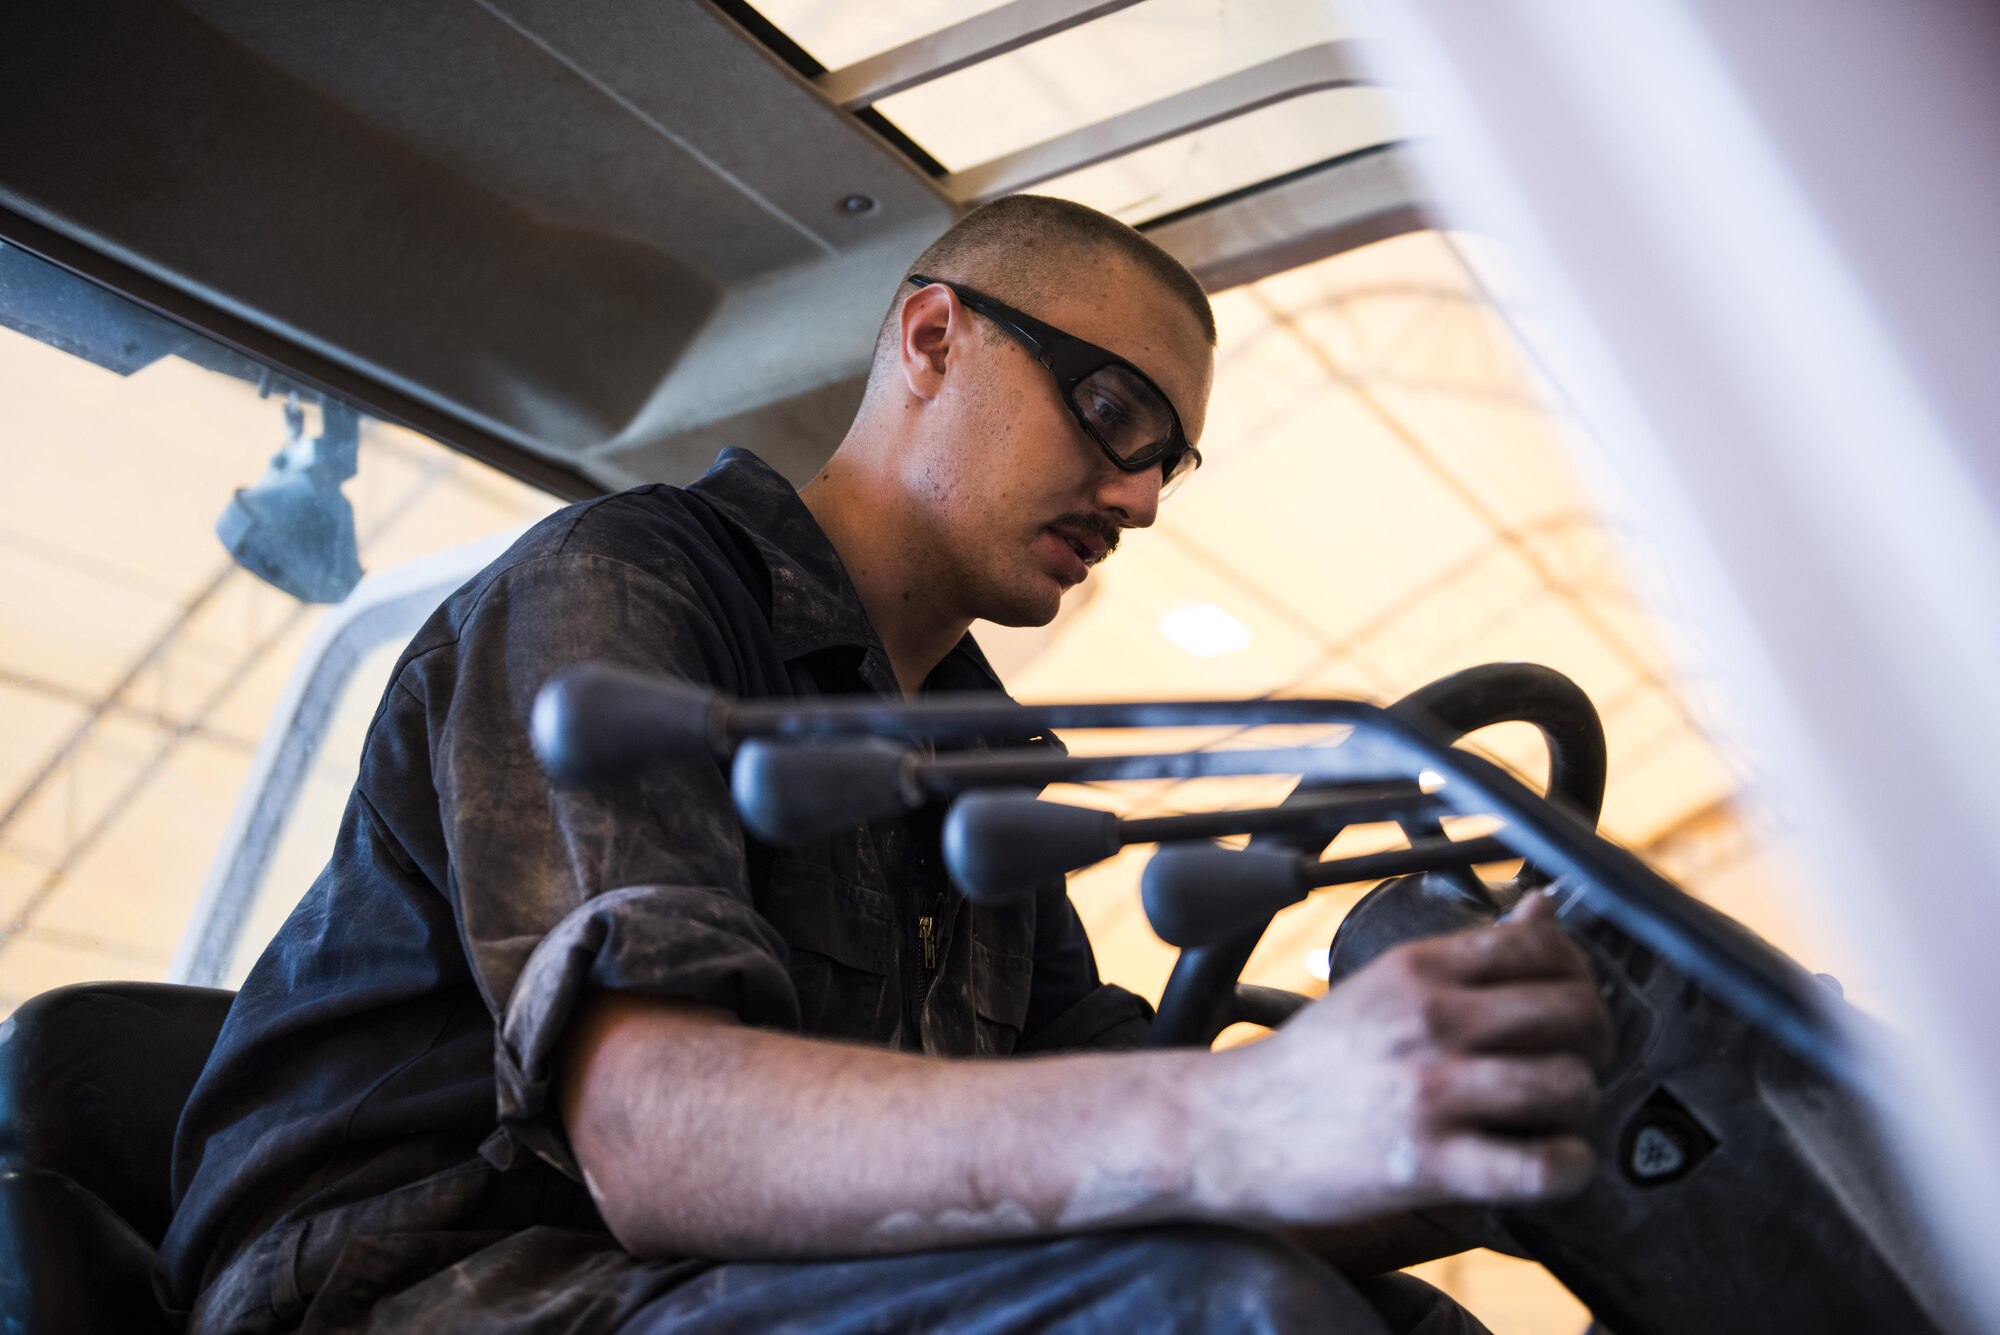 A vehicle maintainer assigned to the 332nd Expeditionary Logistics Readiness Squadron, diagnoses an issue with the controls on a forklift, Sept. 14, 2017, in Southwest Asia. Vehicle maintenance Airmen contribute directly to the mission by ensuring that vehicles used to fuel aircraft, deliver food and equipment, maintain installation security, construct new facilities and transport weapons are all kept in good operating condition. (U.S. Air Force photo by Senior Airman Joshua Kleinholz)